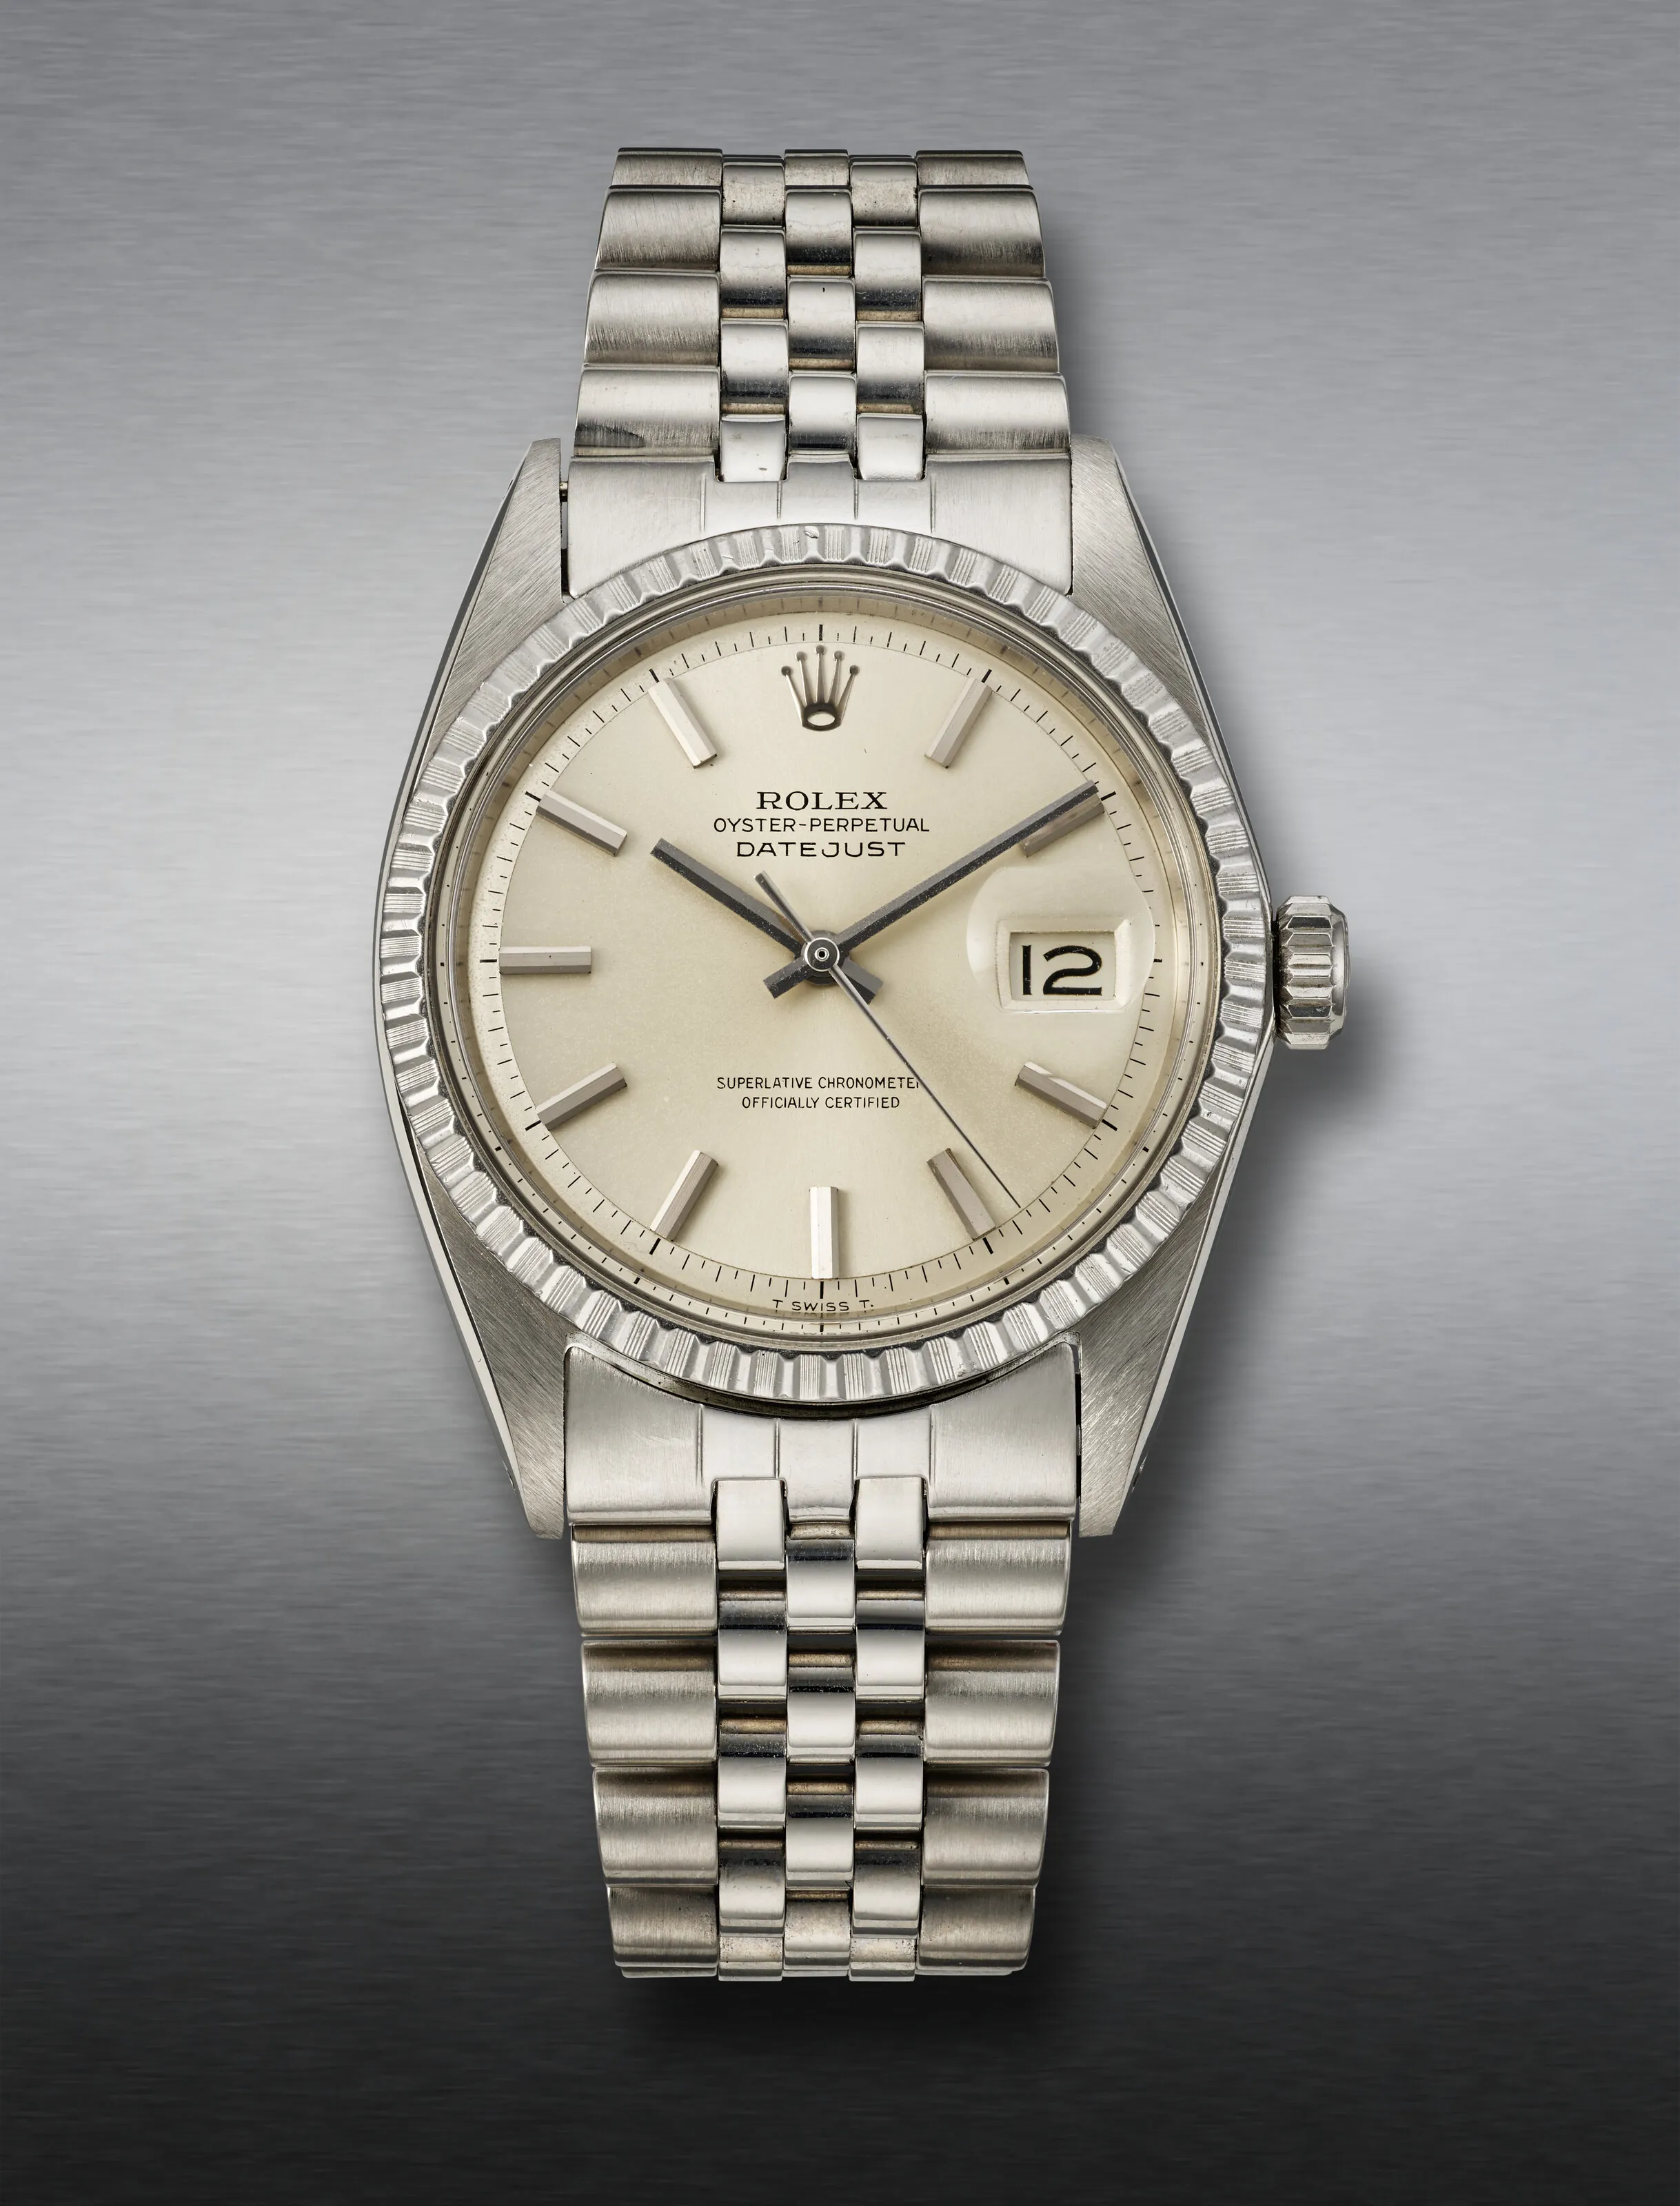 Rolex Datejust 1603 36mm Stainless steel Silvered